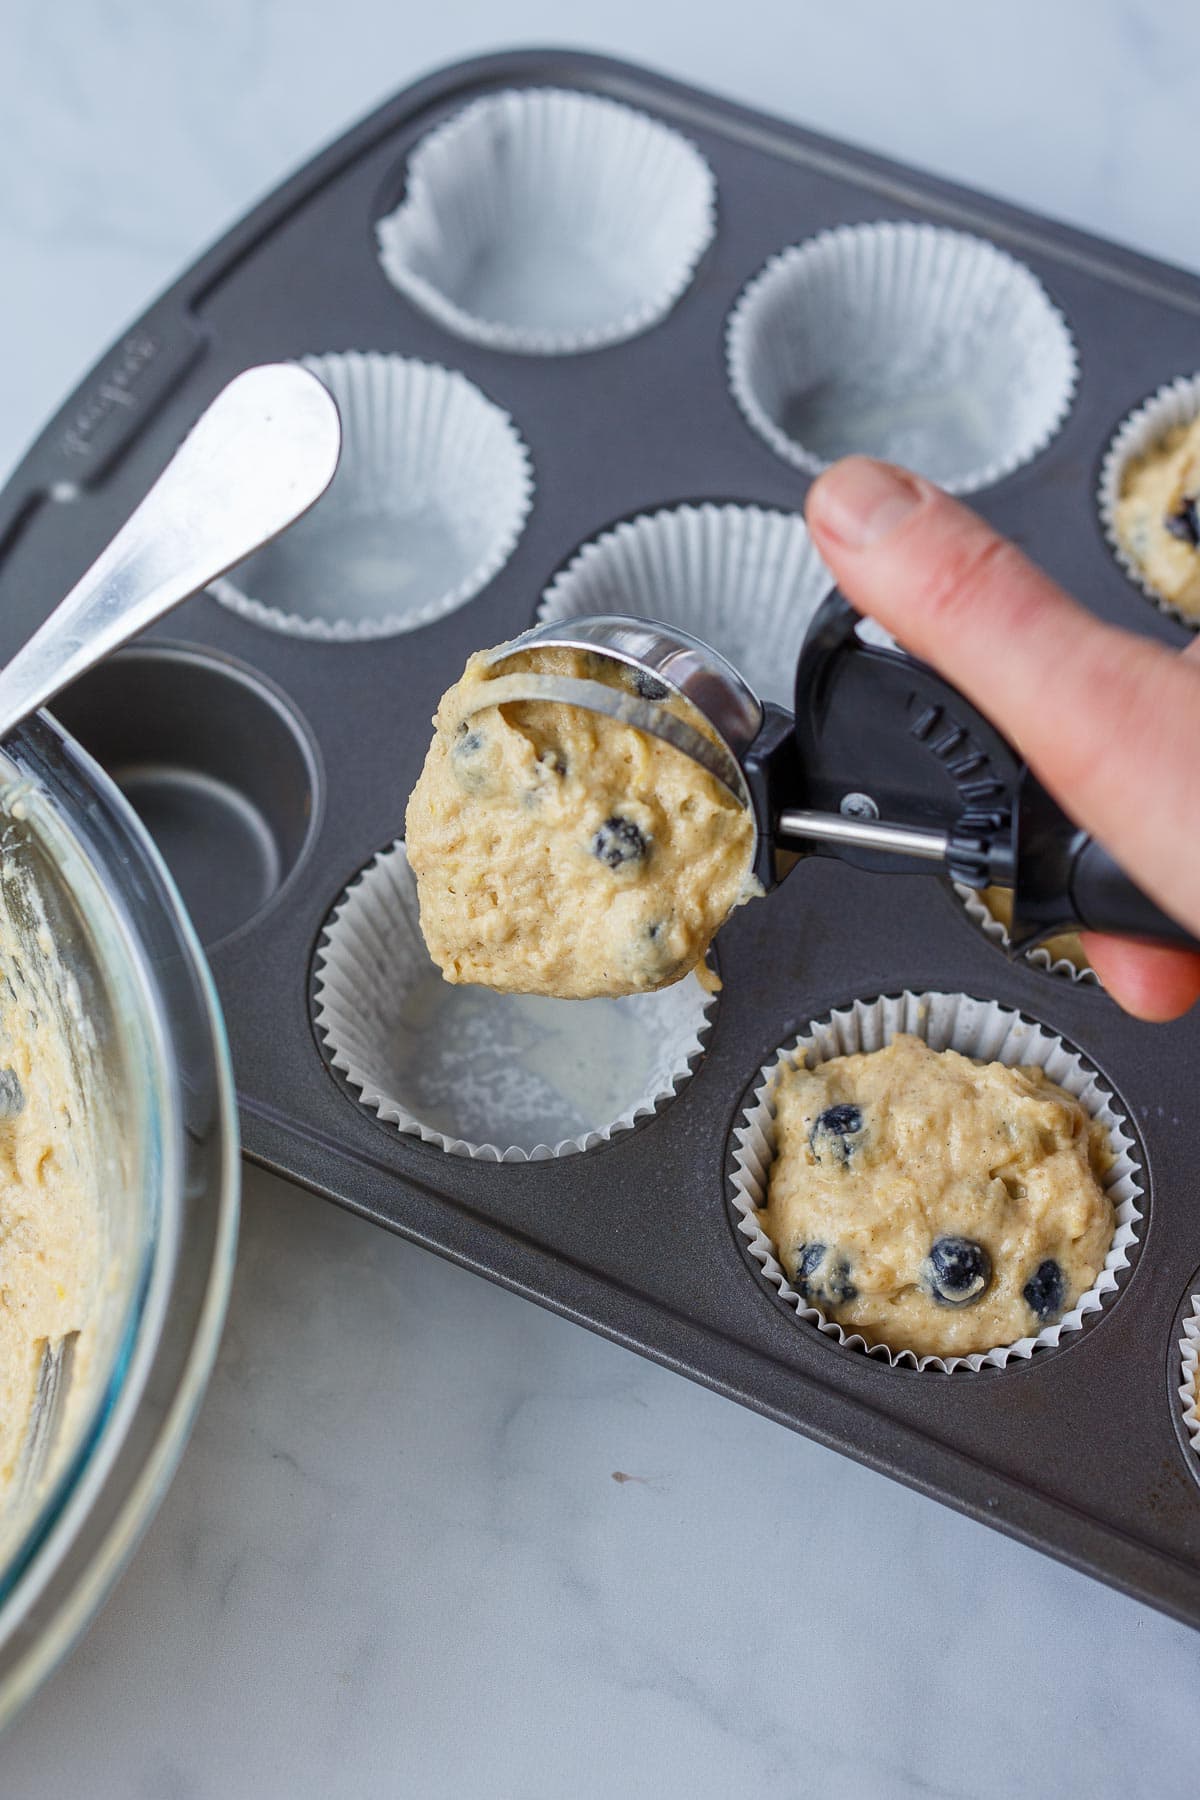 Scooping the batter into muffin tins.